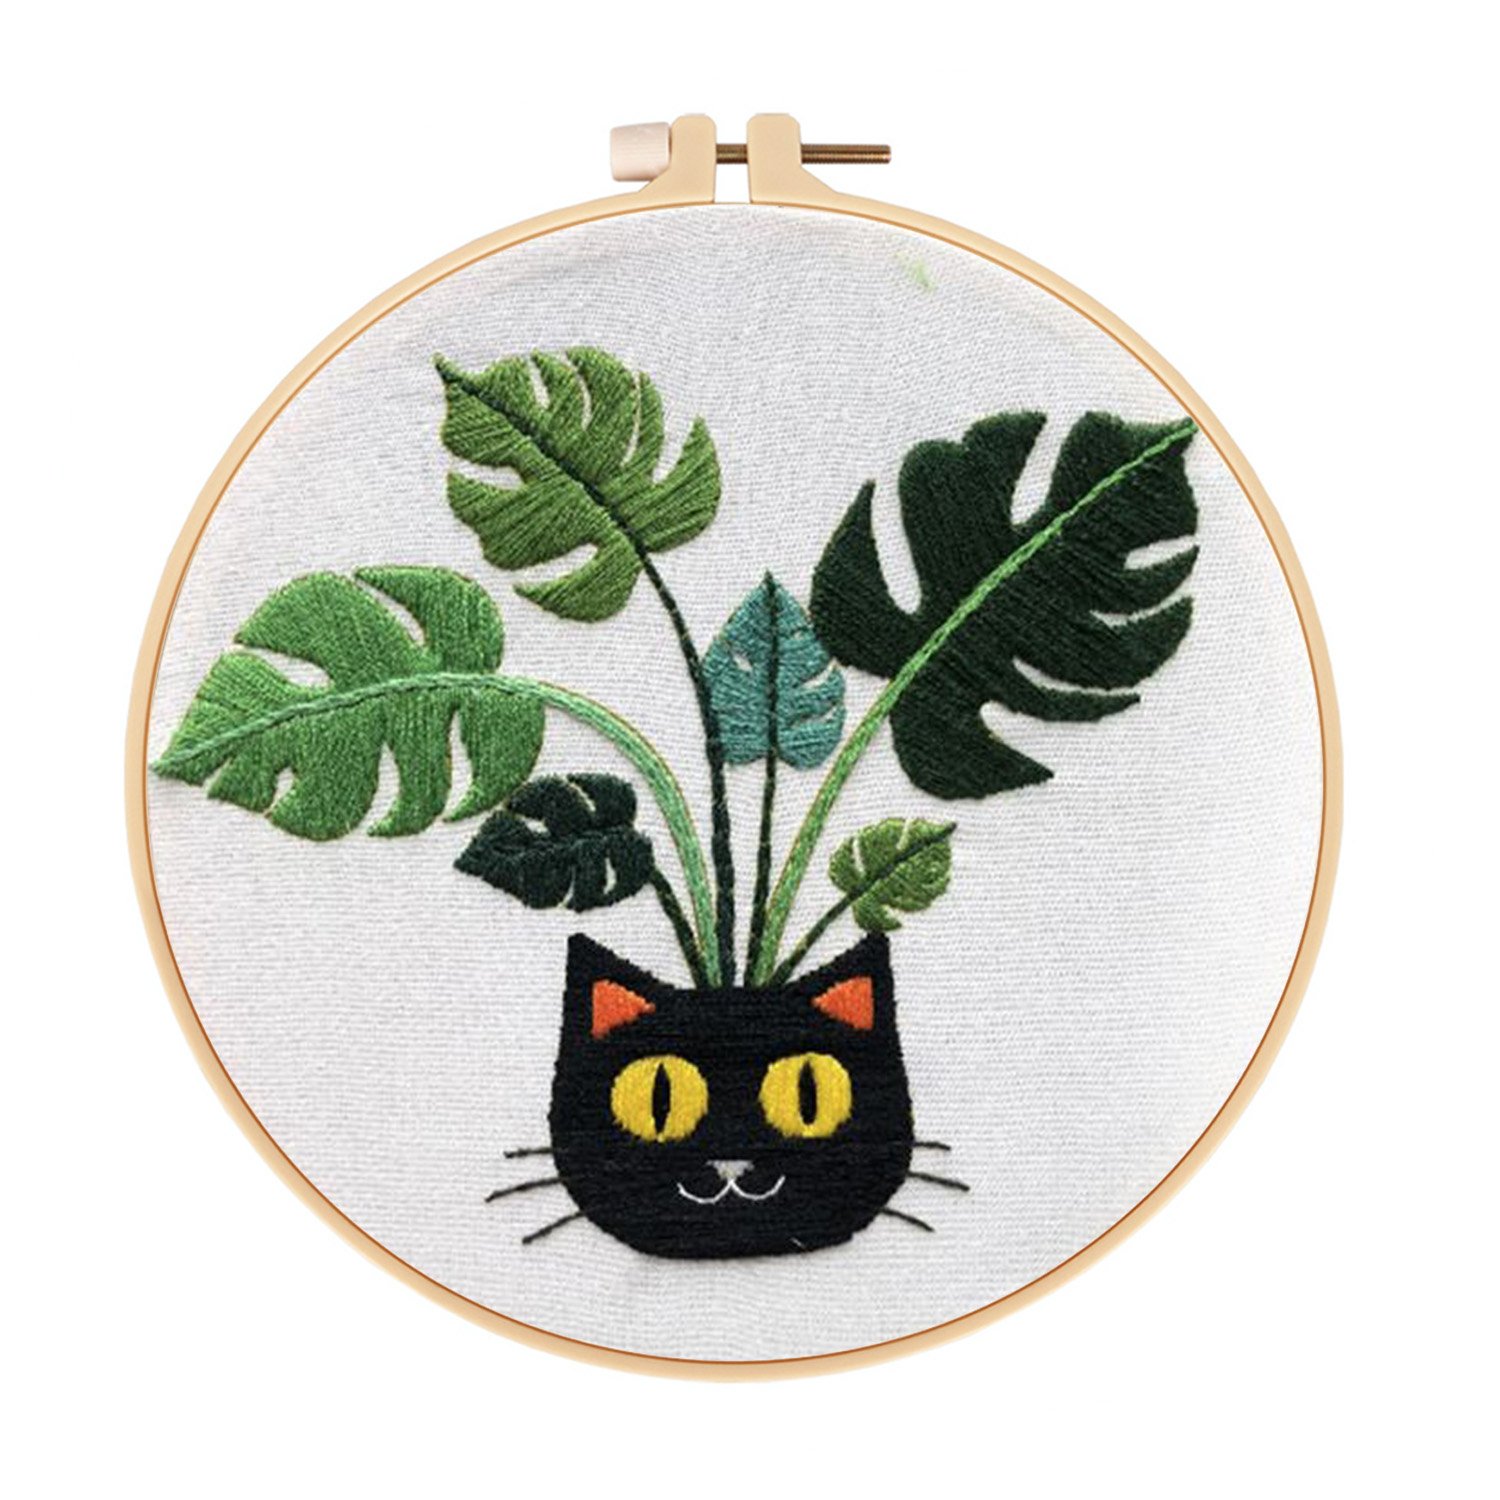 DIY Handmade Embroidery Cross stitch kit for Adult Beginner - Black Cat Potted Pattern